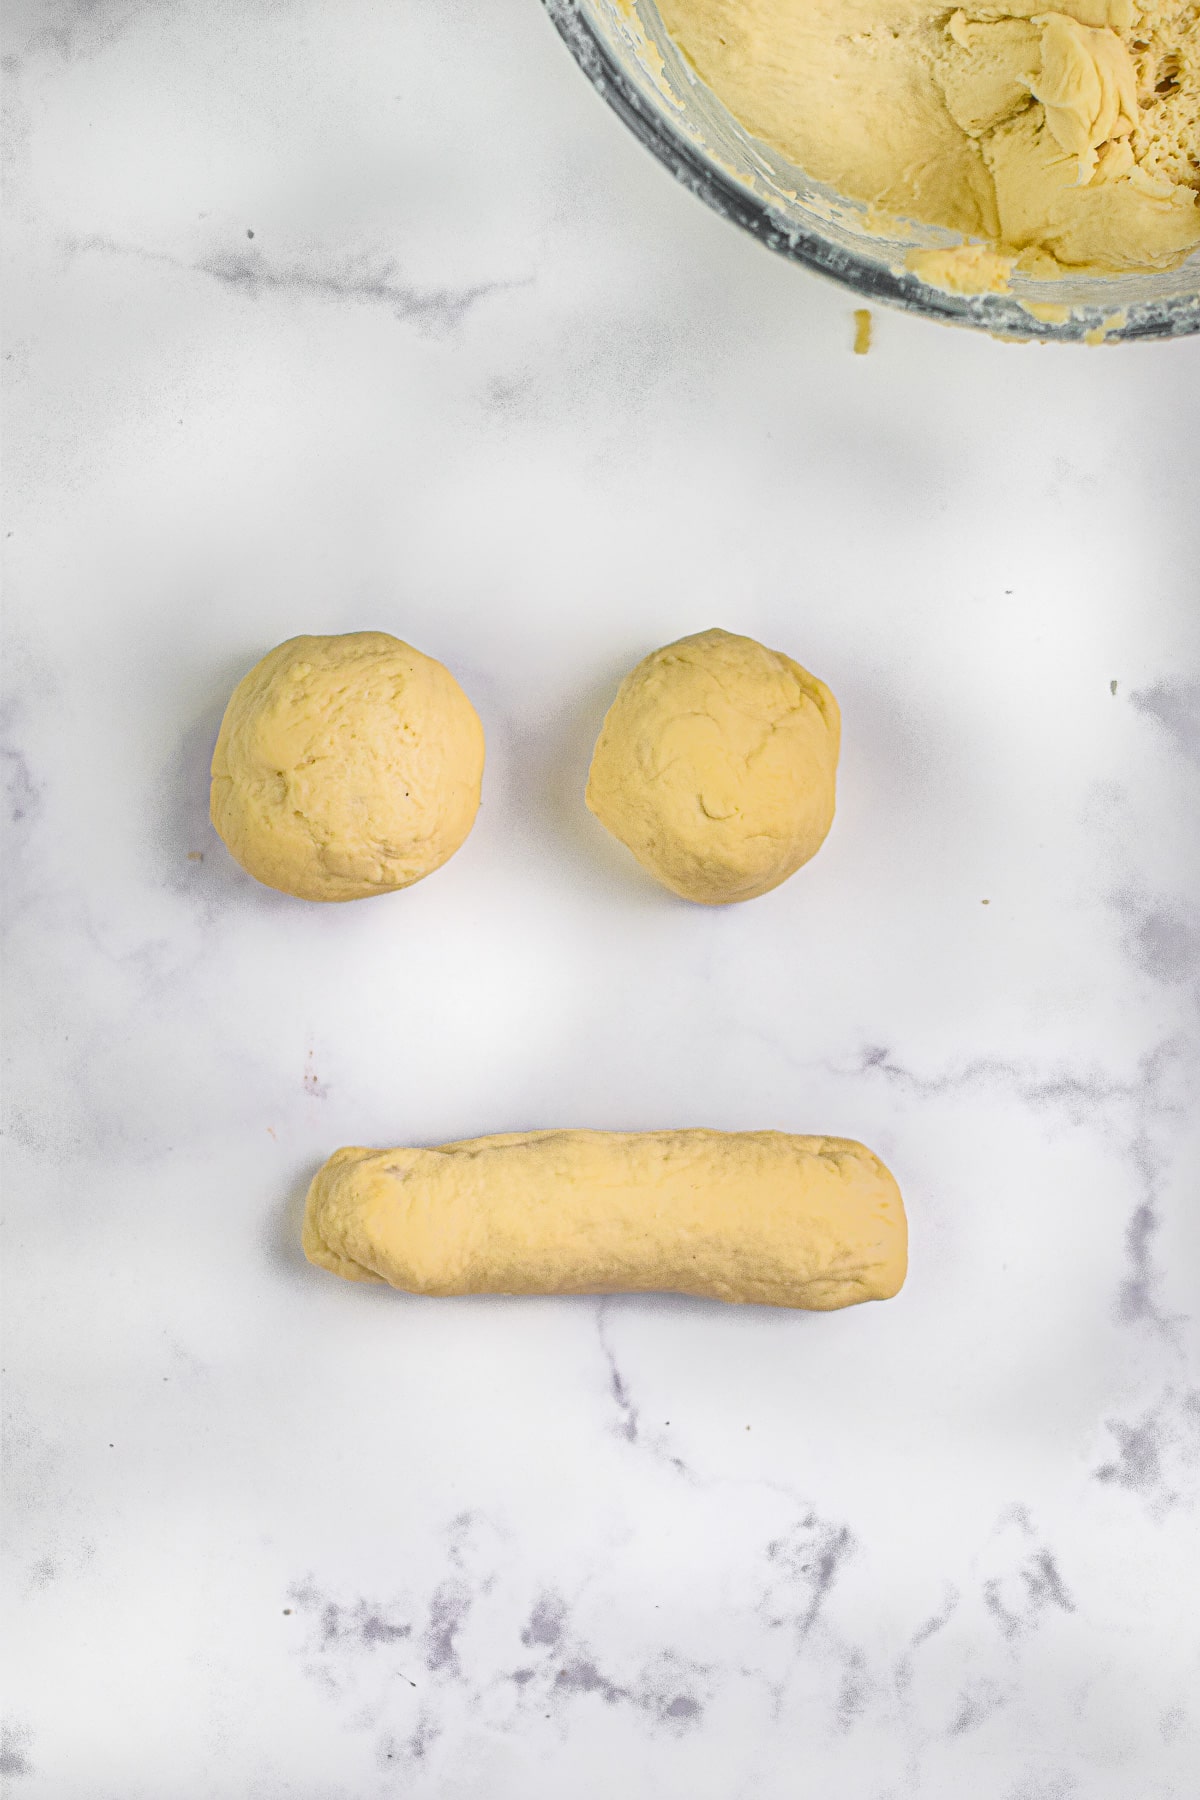 Two dough balls next to a long cylinder shaped piece of dough on a counter.